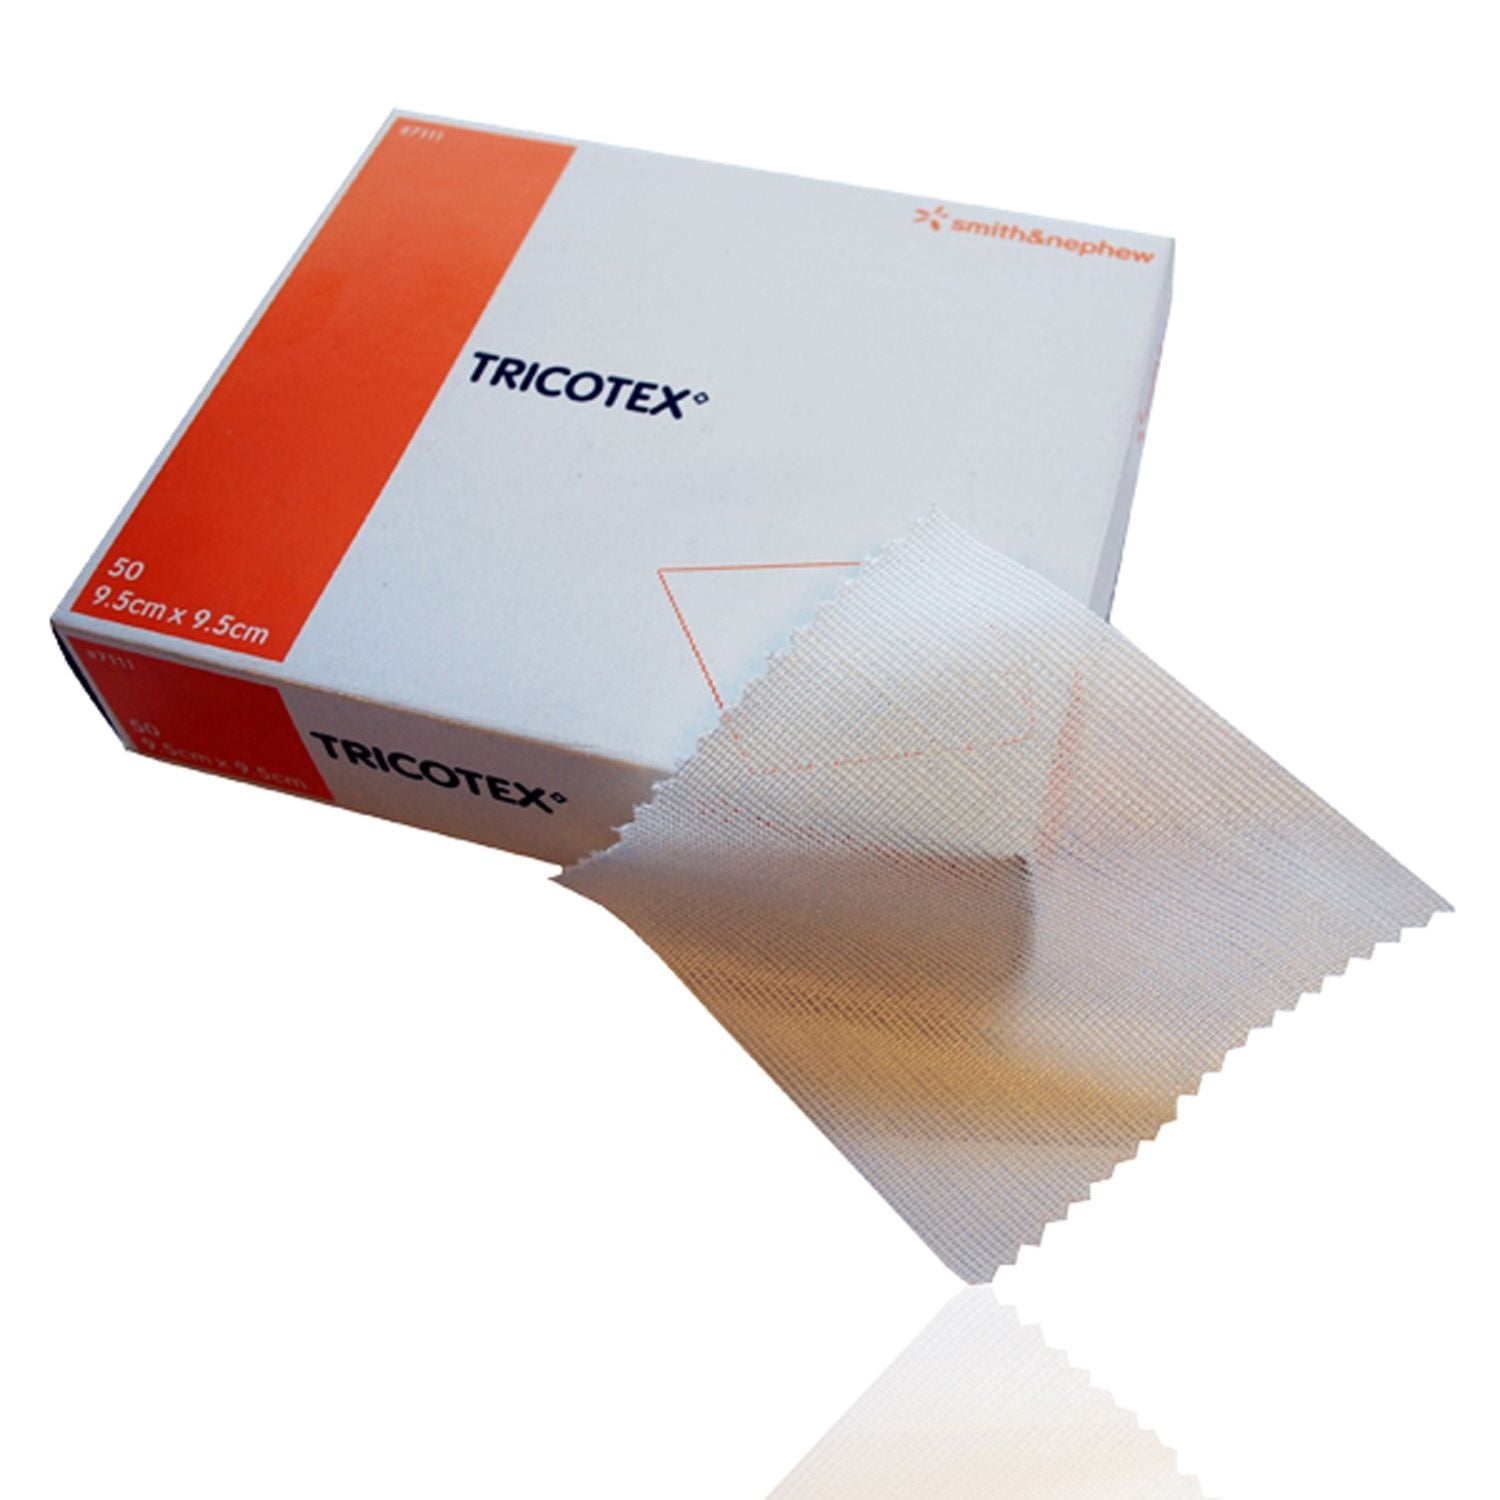 Smith & Nephew Tricotex Sterile Low Adherent Wound Contact Dressing | 9.5 x 9.5cm | Pack of 50